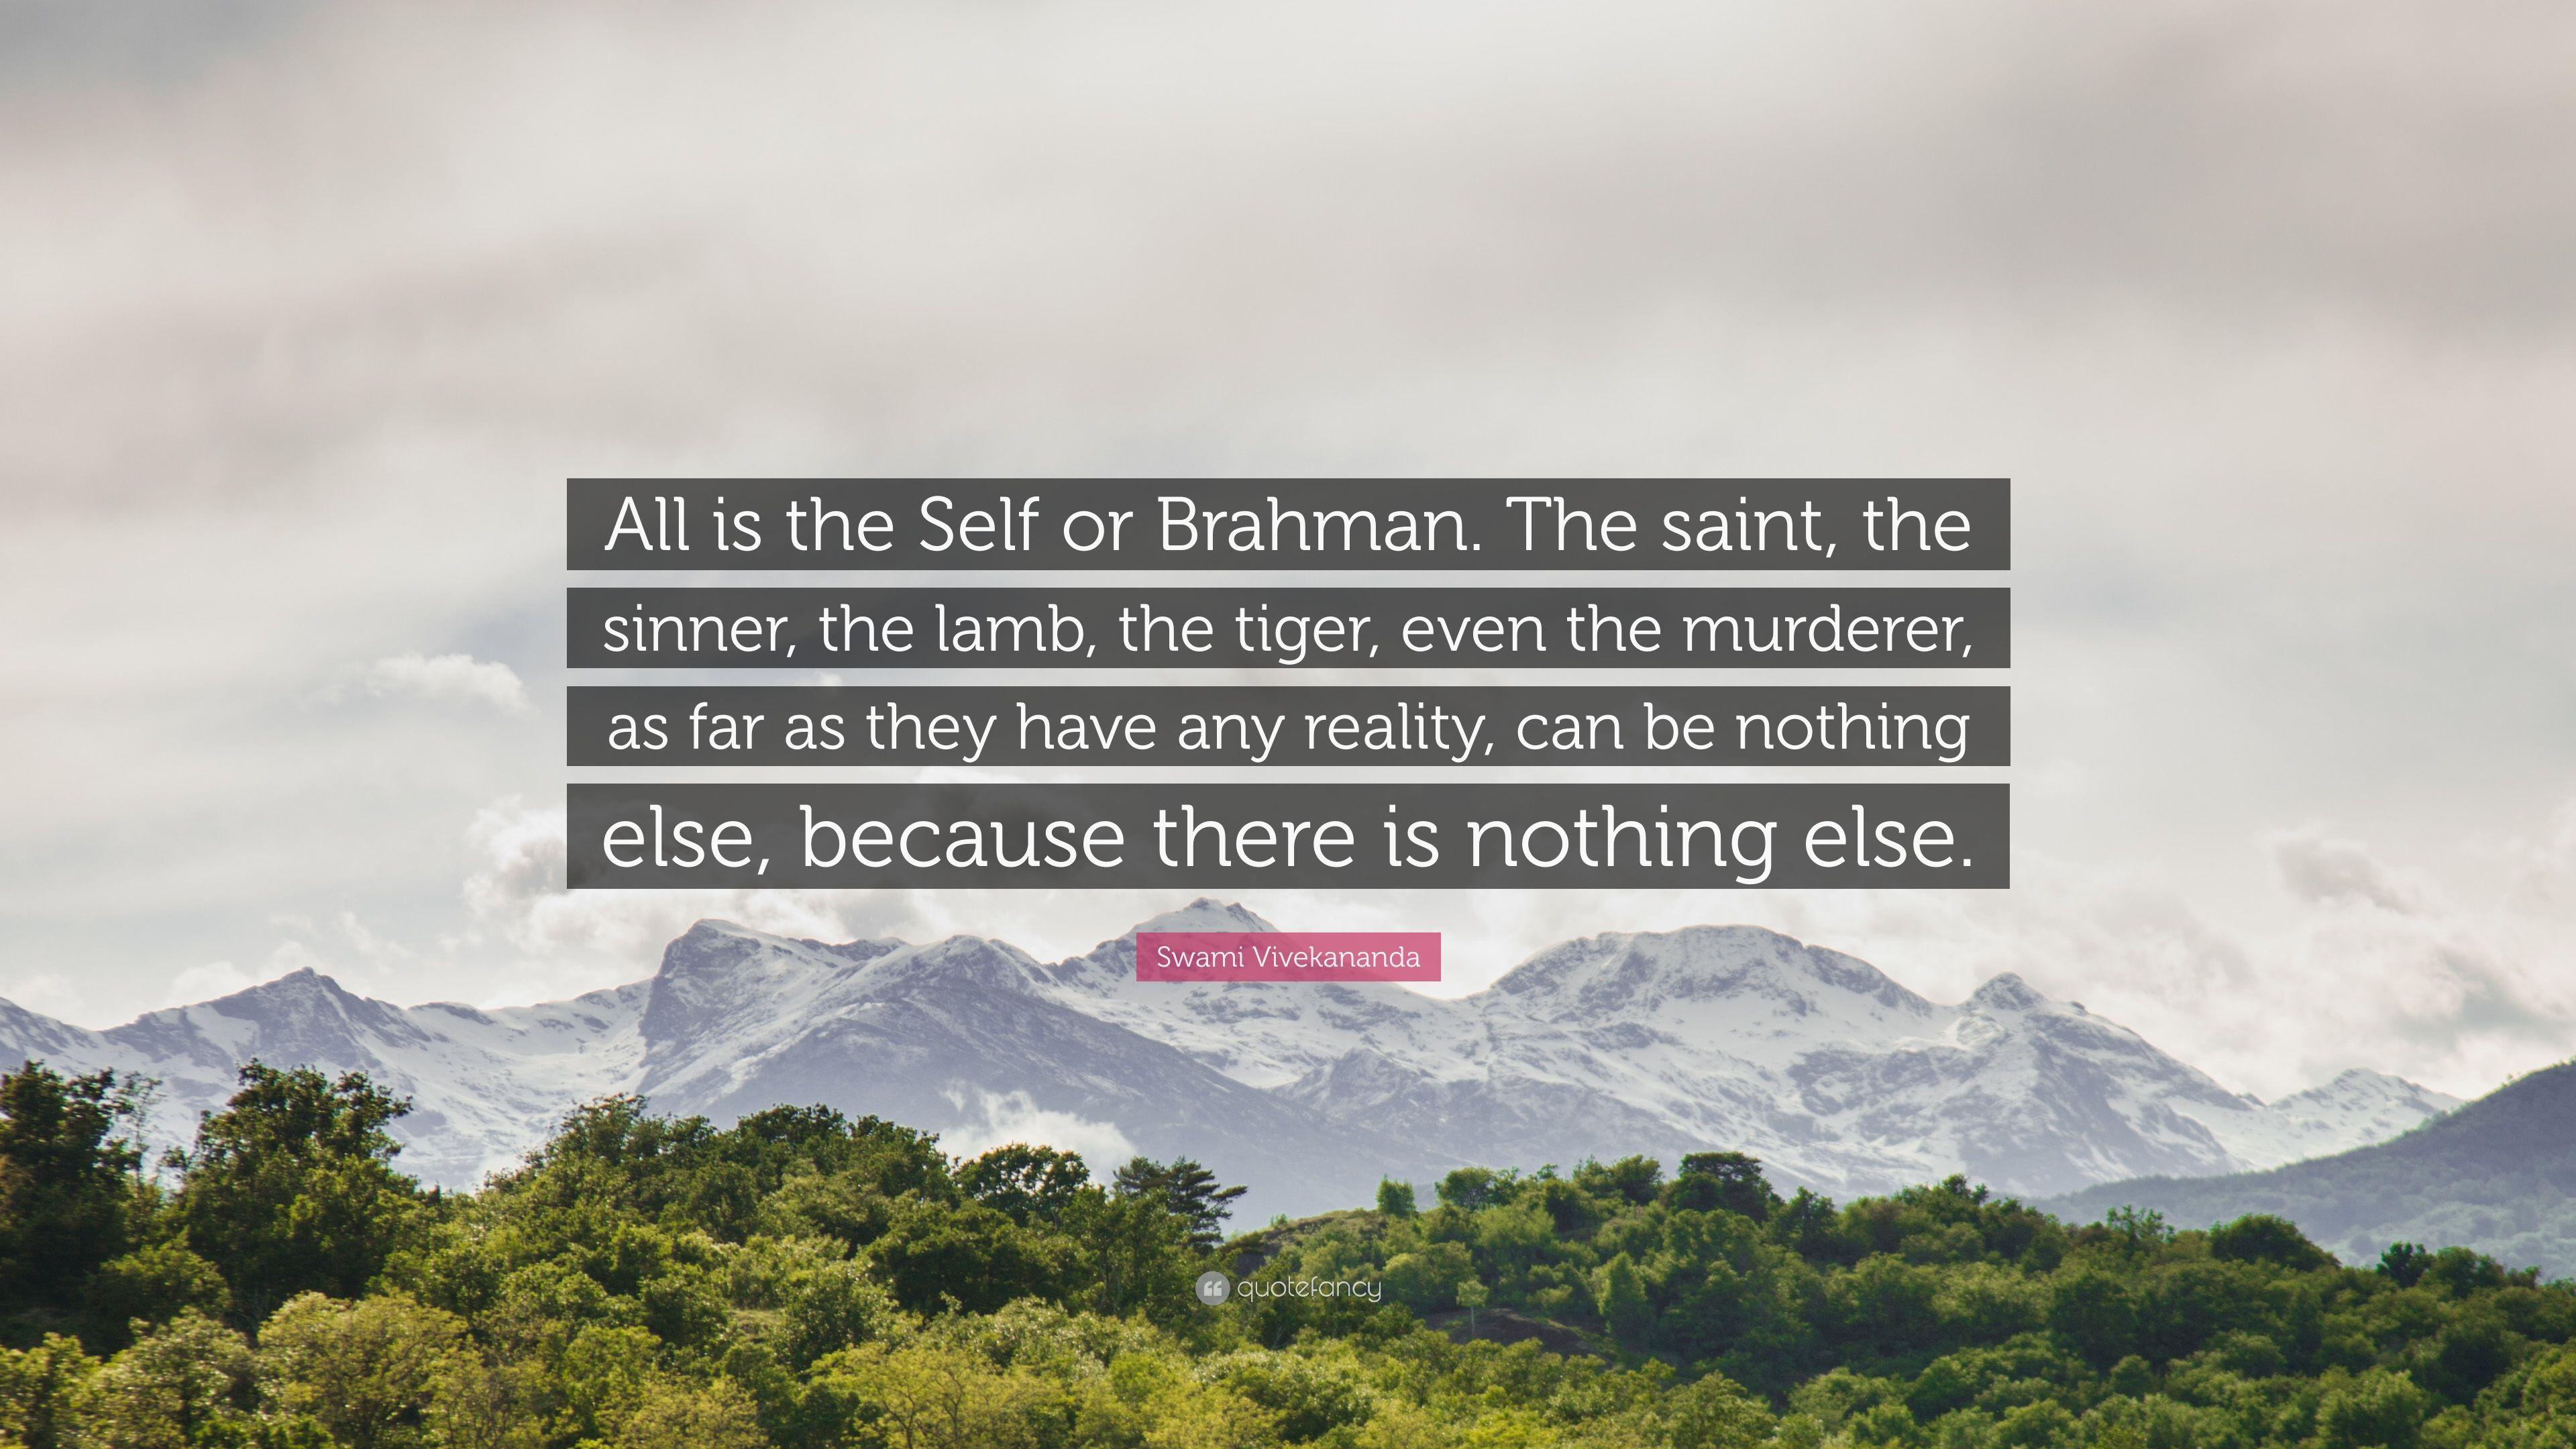 Swami Vivekananda Quote: “All is the Self or Brahman. The saint